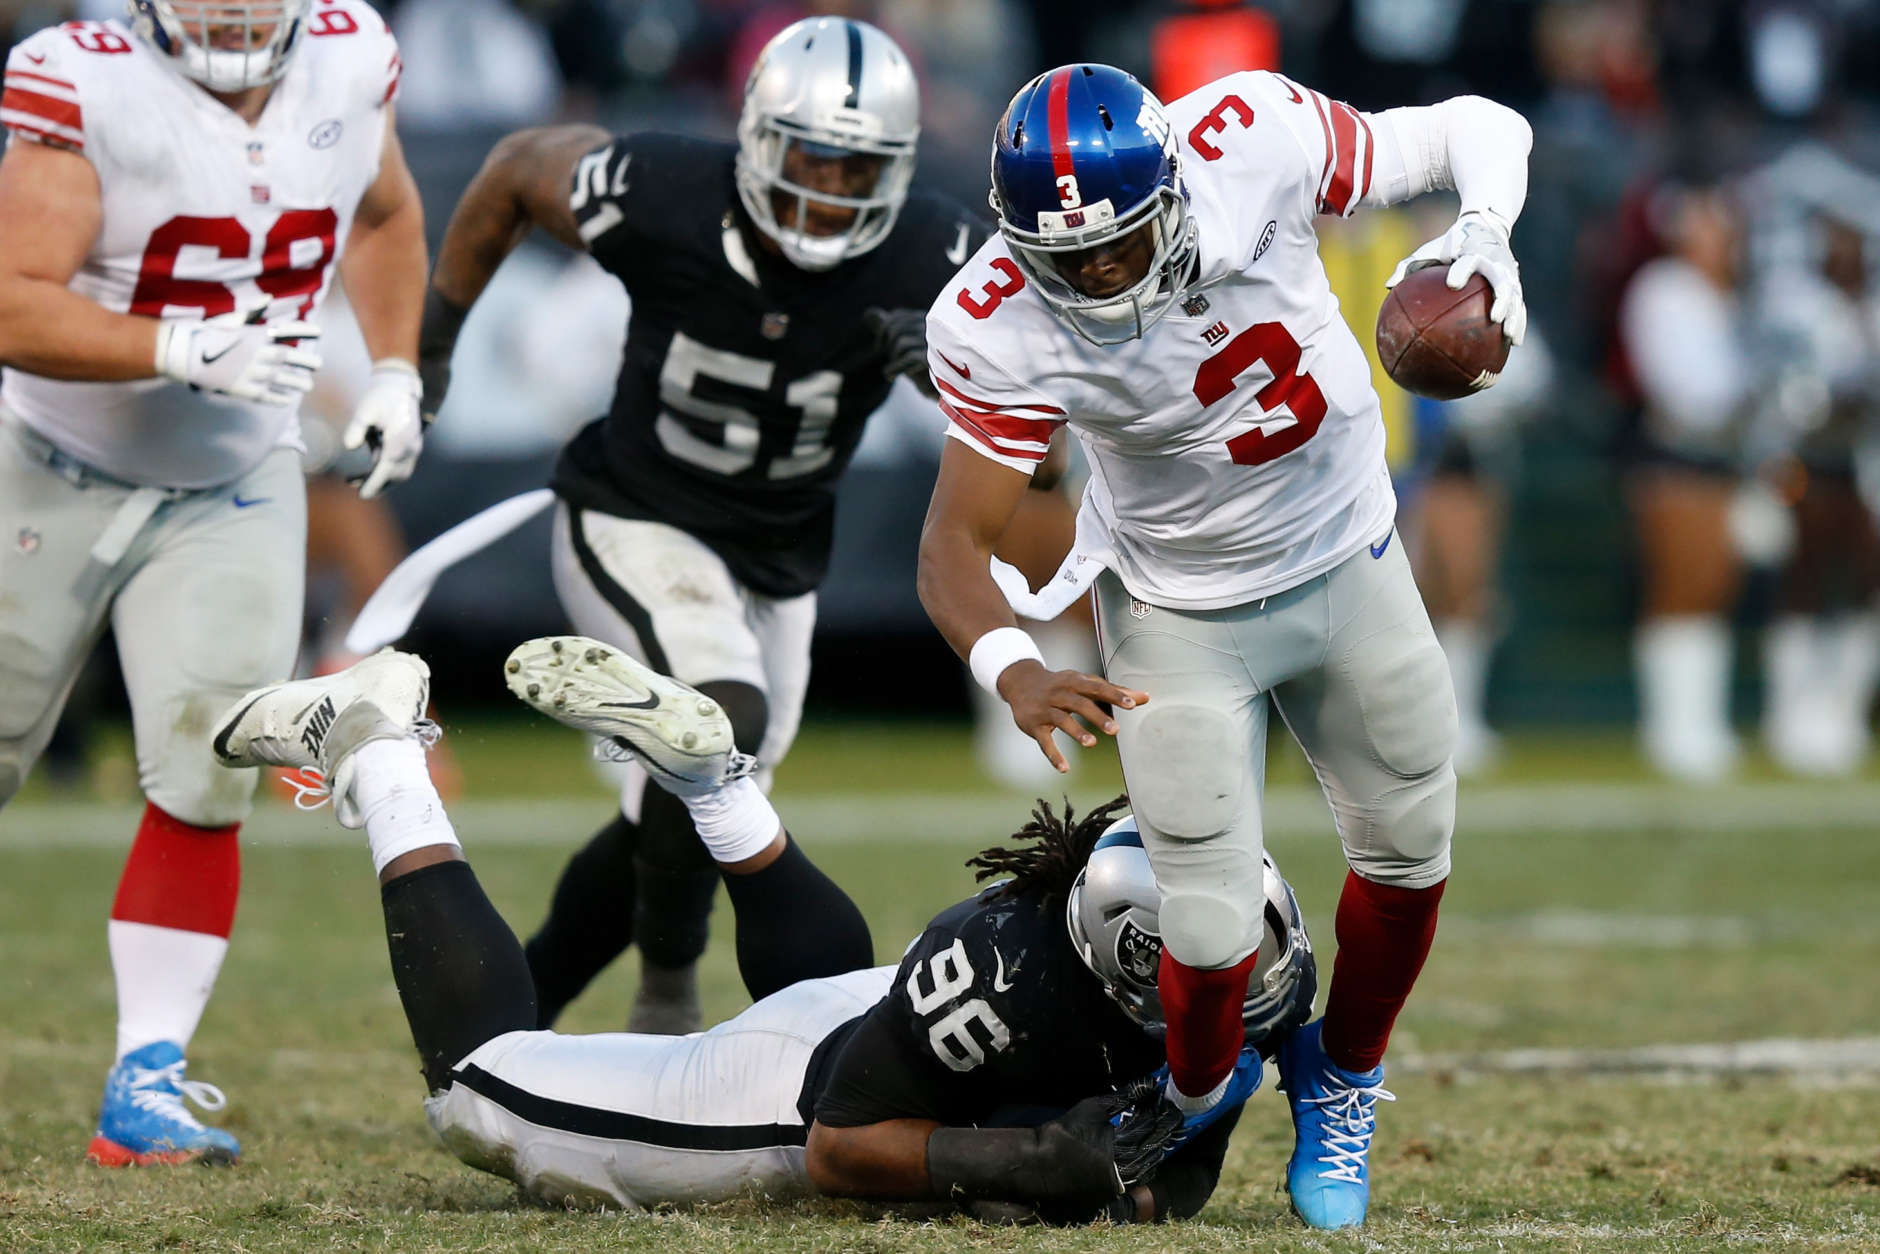 OAKLAND, CA - DECEMBER 03:  Denico Autry #96 of the Oakland Raiders sacks Geno Smith #3 of the New York Giants during their NFL game at Oakland-Alameda County Coliseum on December 3, 2017 in Oakland, California.  (Photo by Lachlan Cunningham/Getty Images)